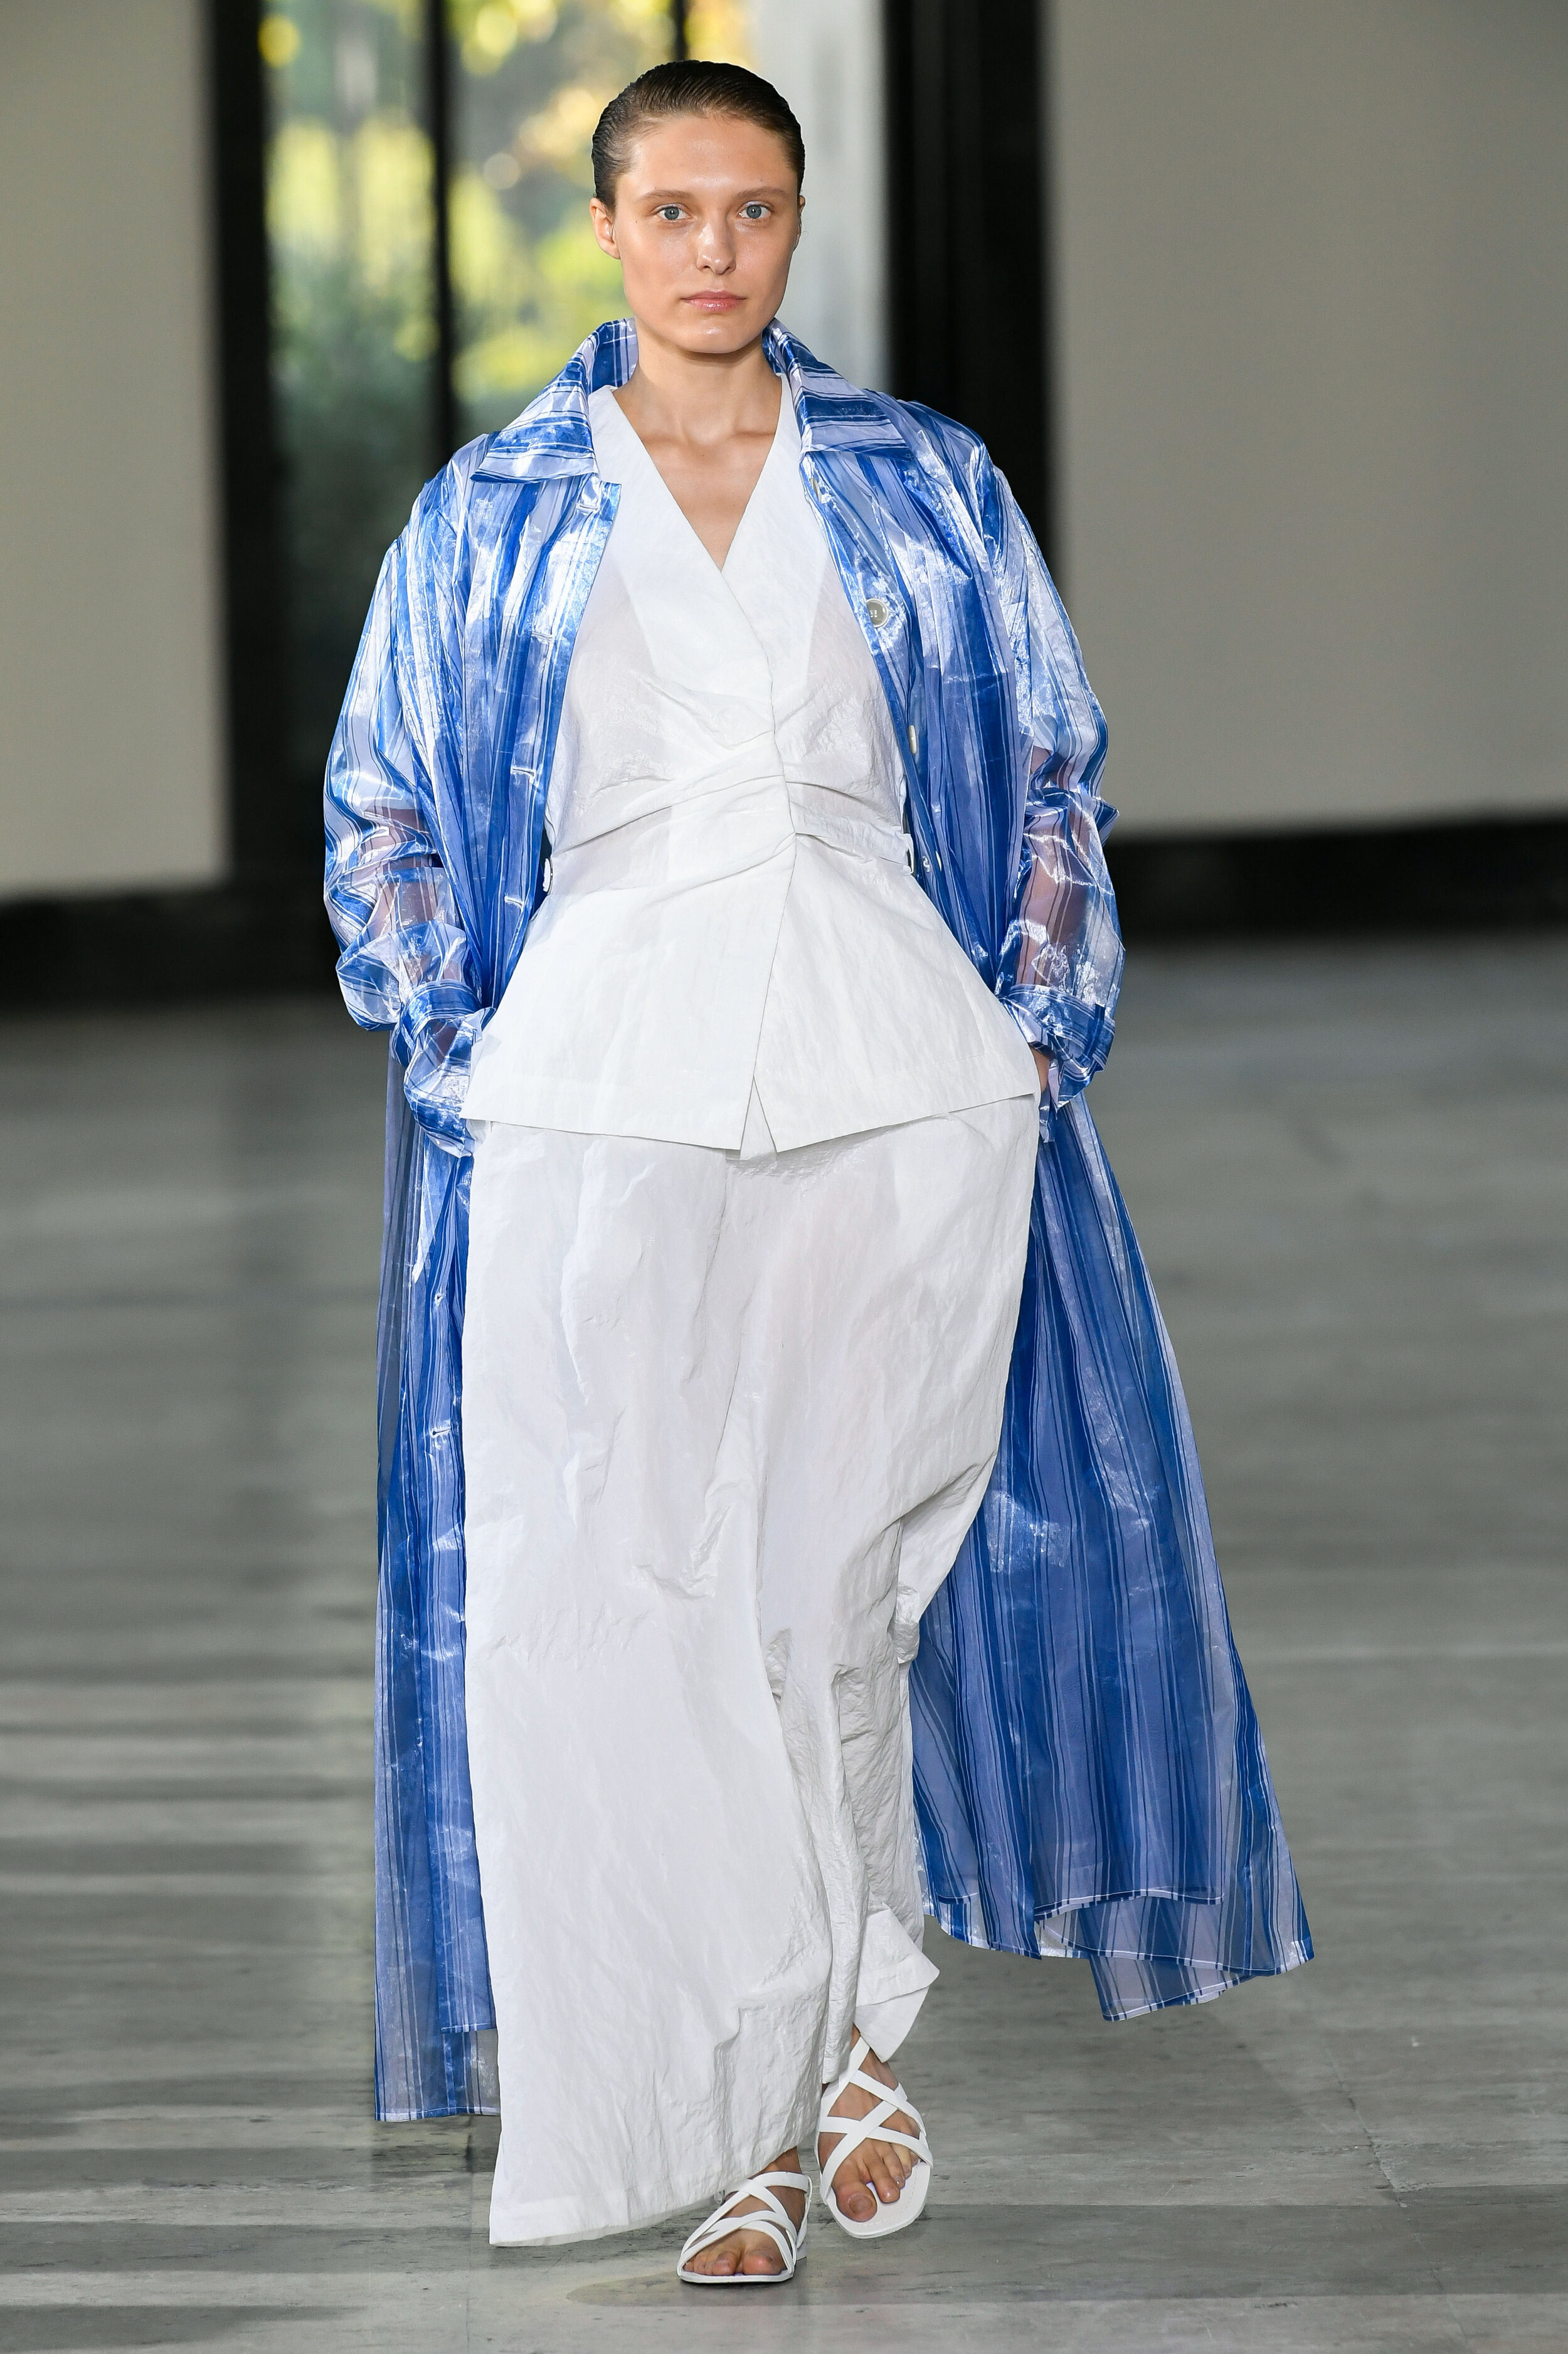  Model wears an outfit , as part of the women ready-to-wear summer 2020, women fashion week, Milan, Ita, from the house of Dawei 